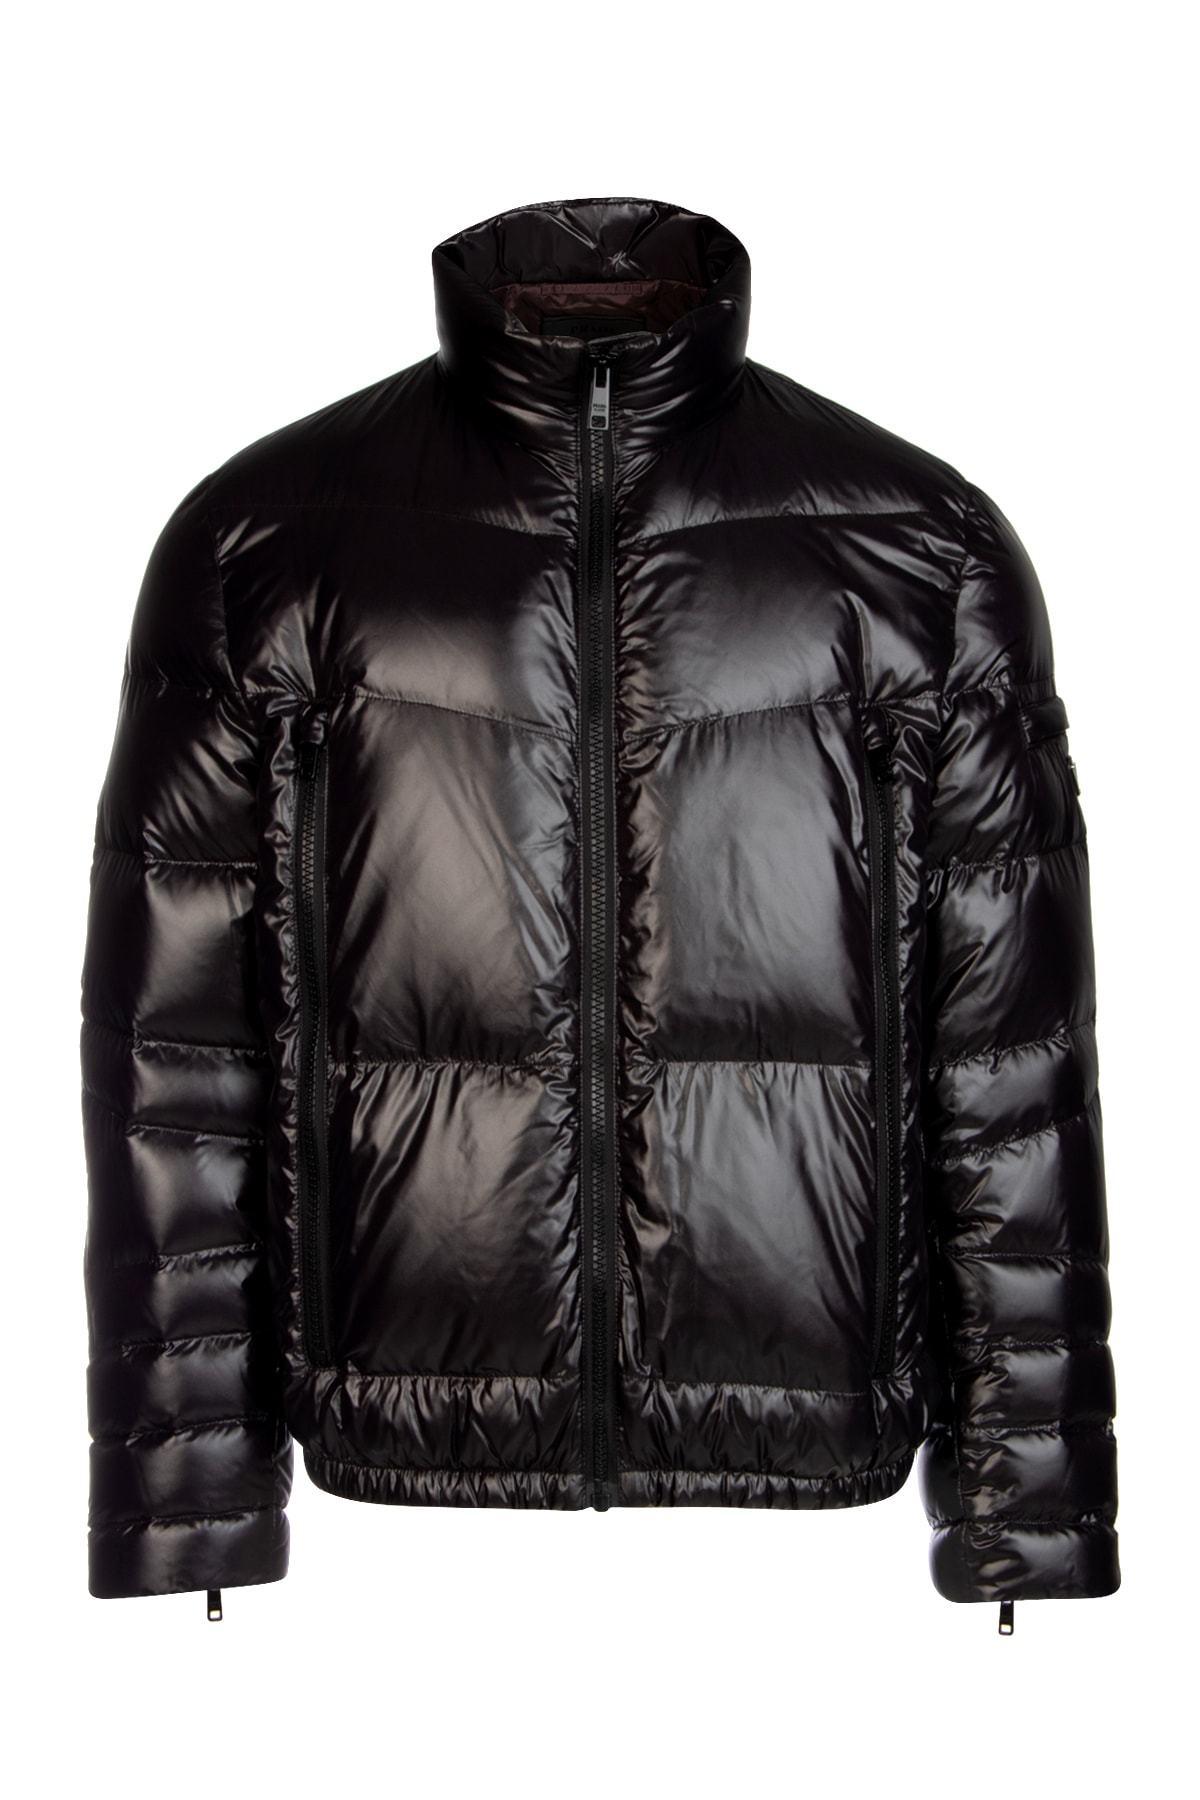 Prada Synthetic Triangle Logo Puffer Jacket in Black for Men - Save 6% ...